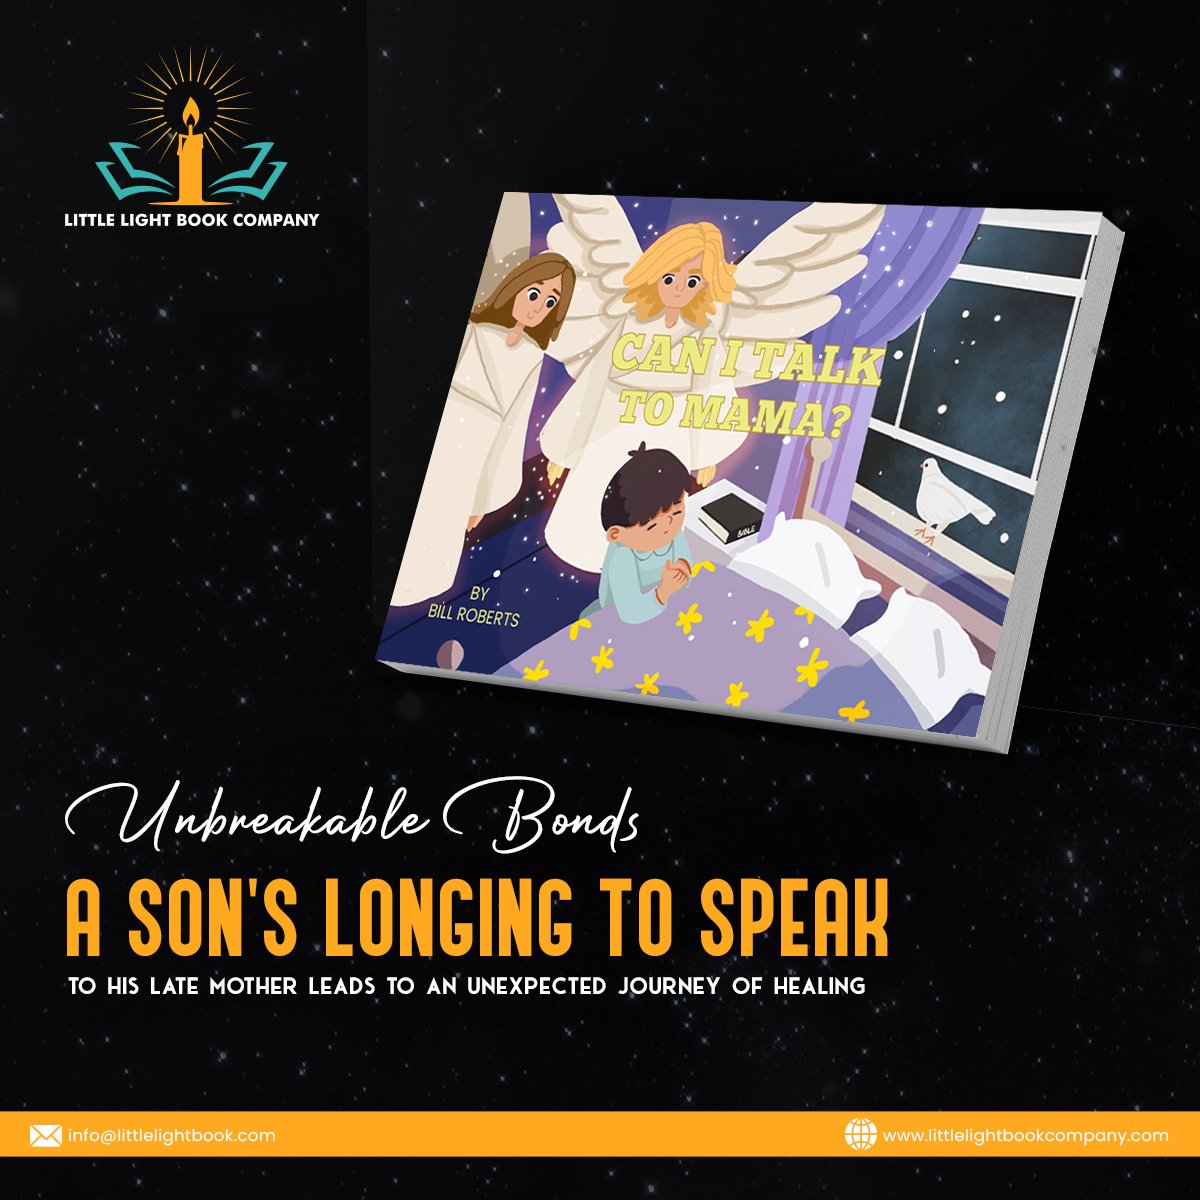 Unbreakable Bonds A Son's Longing to Speak to His Late Mother Leads to an Unexpected Journey of Healing.

#UnbreakableBonds #HealingJourney #LateMother #SonLove #MemoriesOfMom #LittleLightBookCompany #FamilyStories #PersonalGrowth #EmotionalHealing #FindingClosure #LoveNeverDies